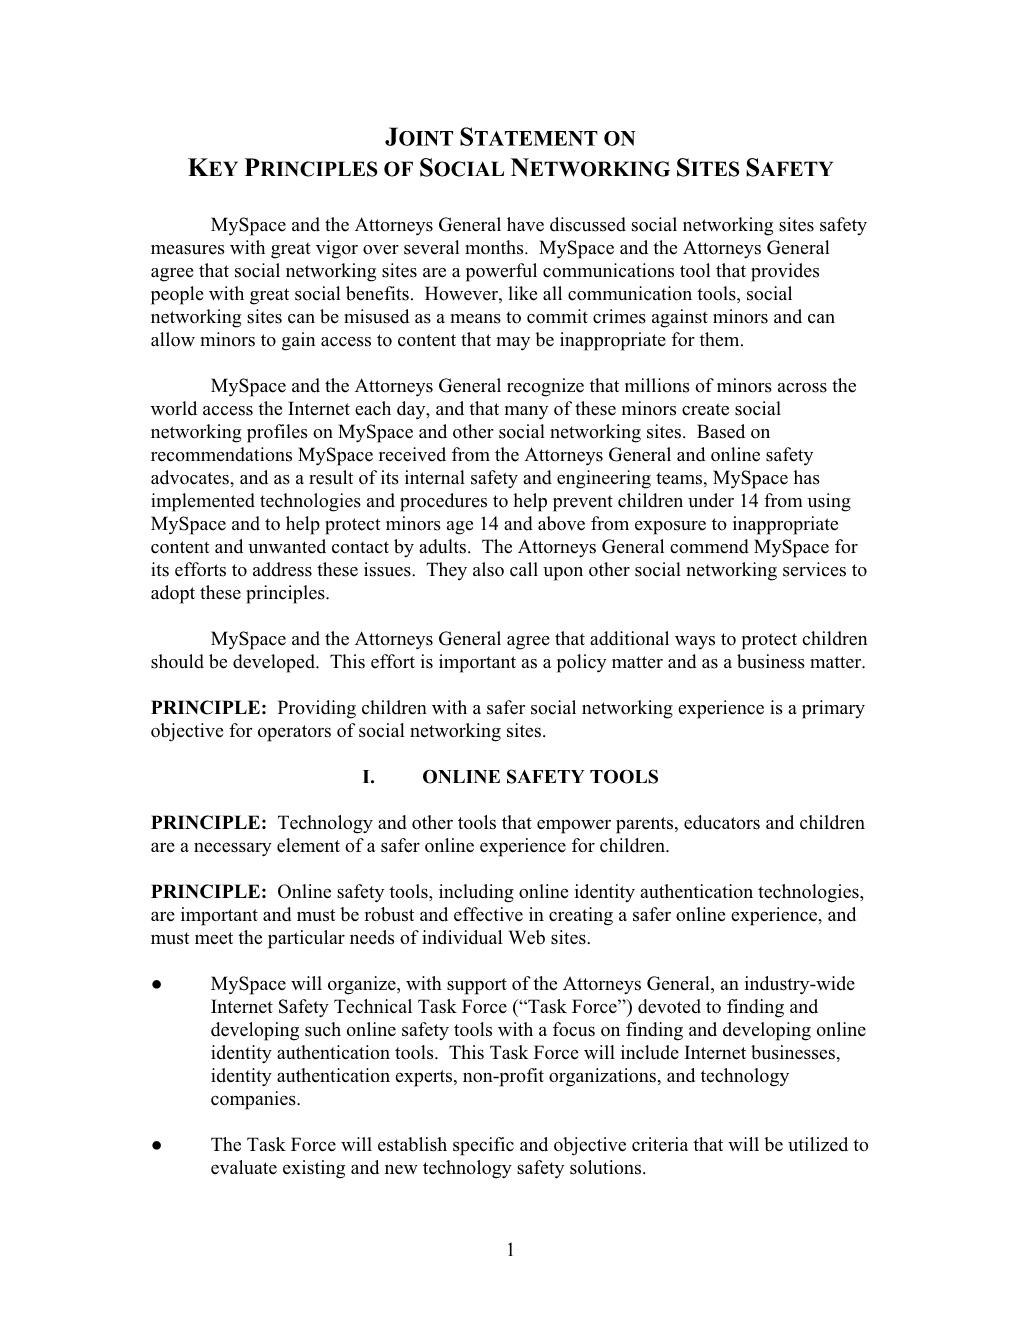 Joint Statement on Key Principles of Social Networking Sites Safety